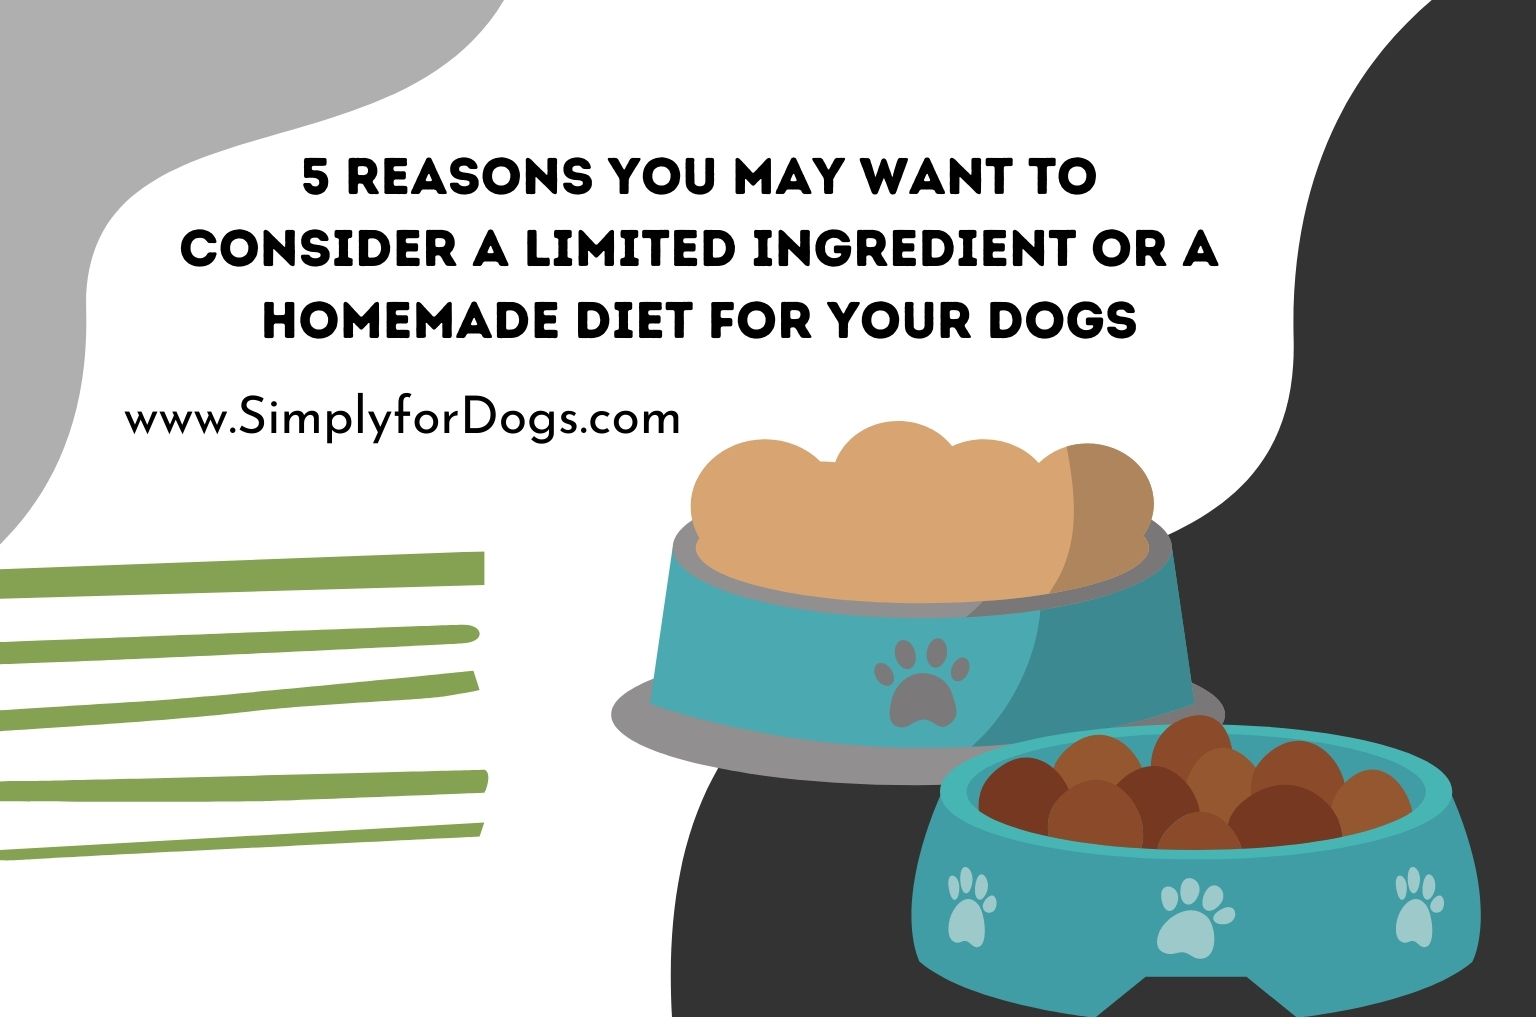 5 Reasons You May Want to Consider a Limited Ingredient or a Homemade Diet for Your Dogs